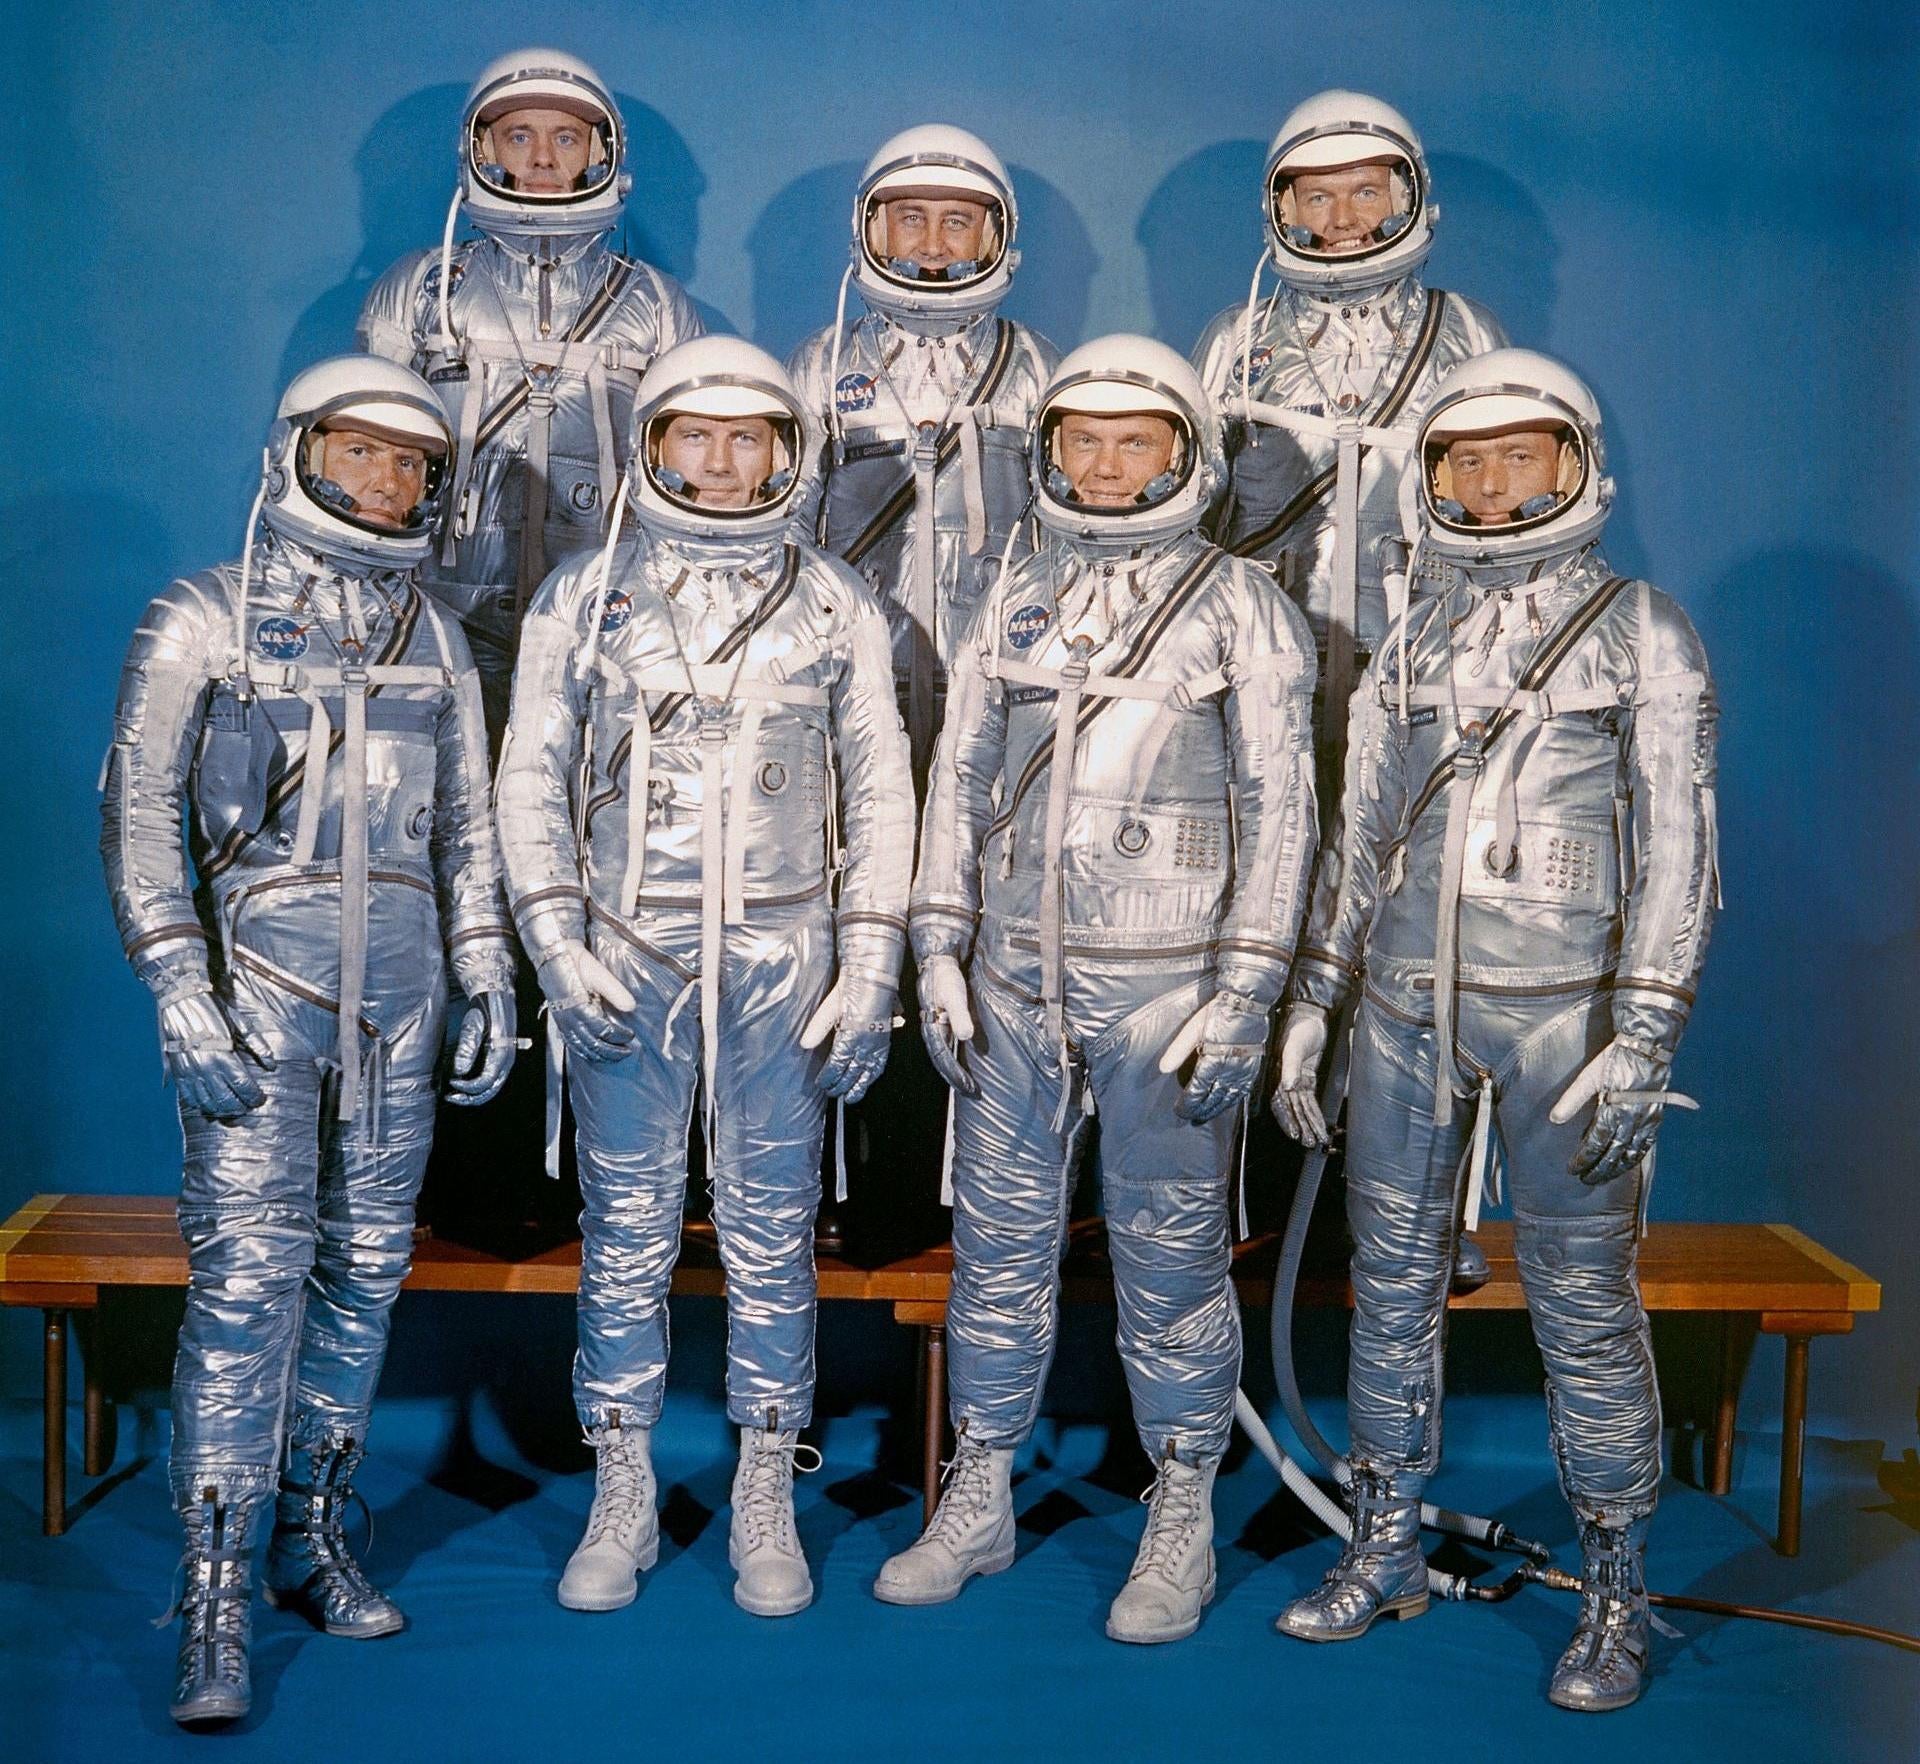 NASA's first astronaut class, the Mercury 7, had the best spacesuits. This photo was taken on April 9, 1959.  (Photo: NASA)